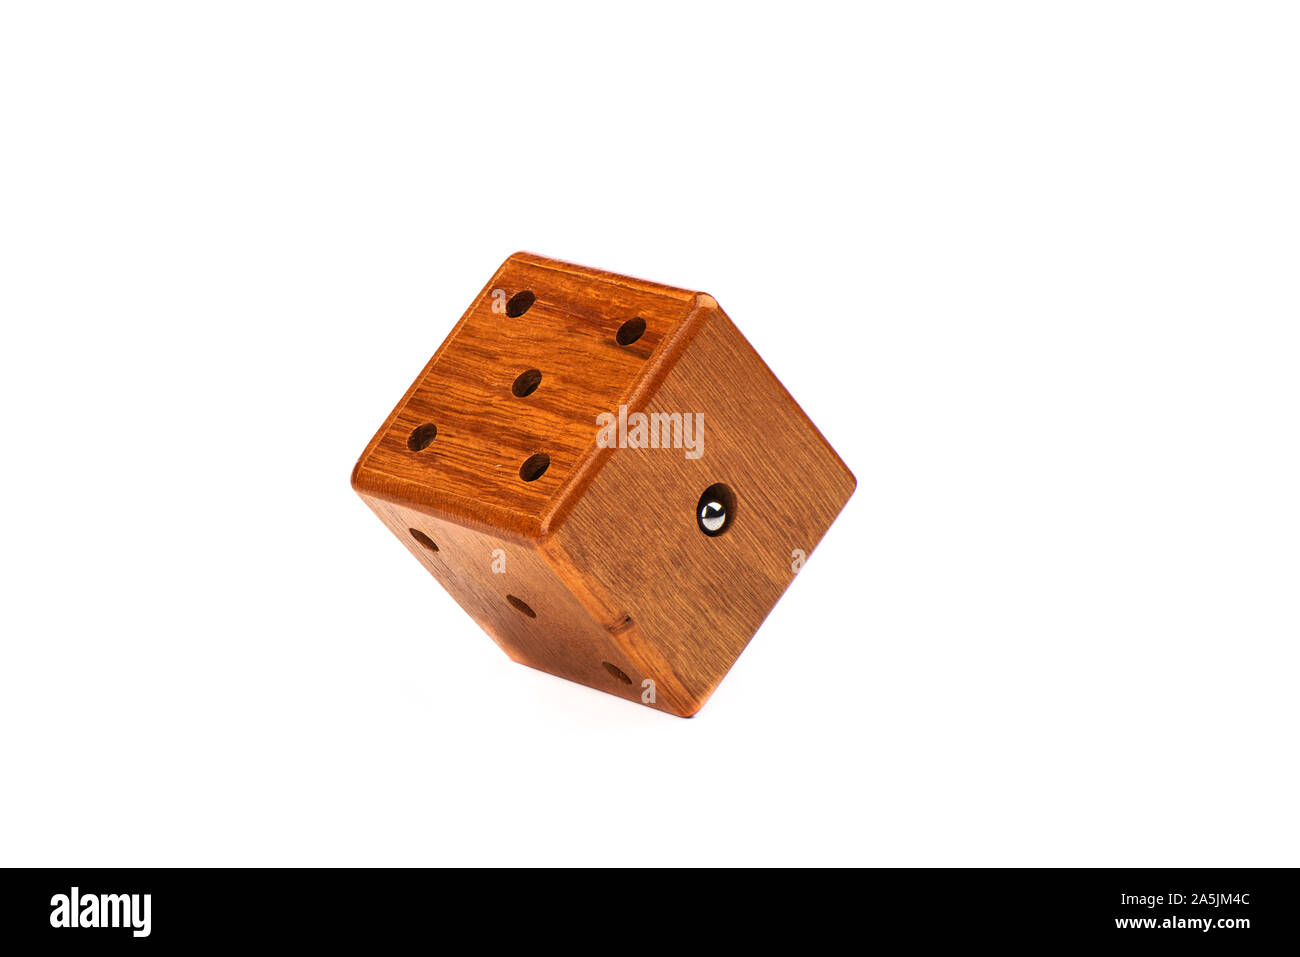 Puzzle magic cube three-dimensional maze. Wooden cube with a metal ball on a white background. Puzzle concept. Copy space. Stock Photo